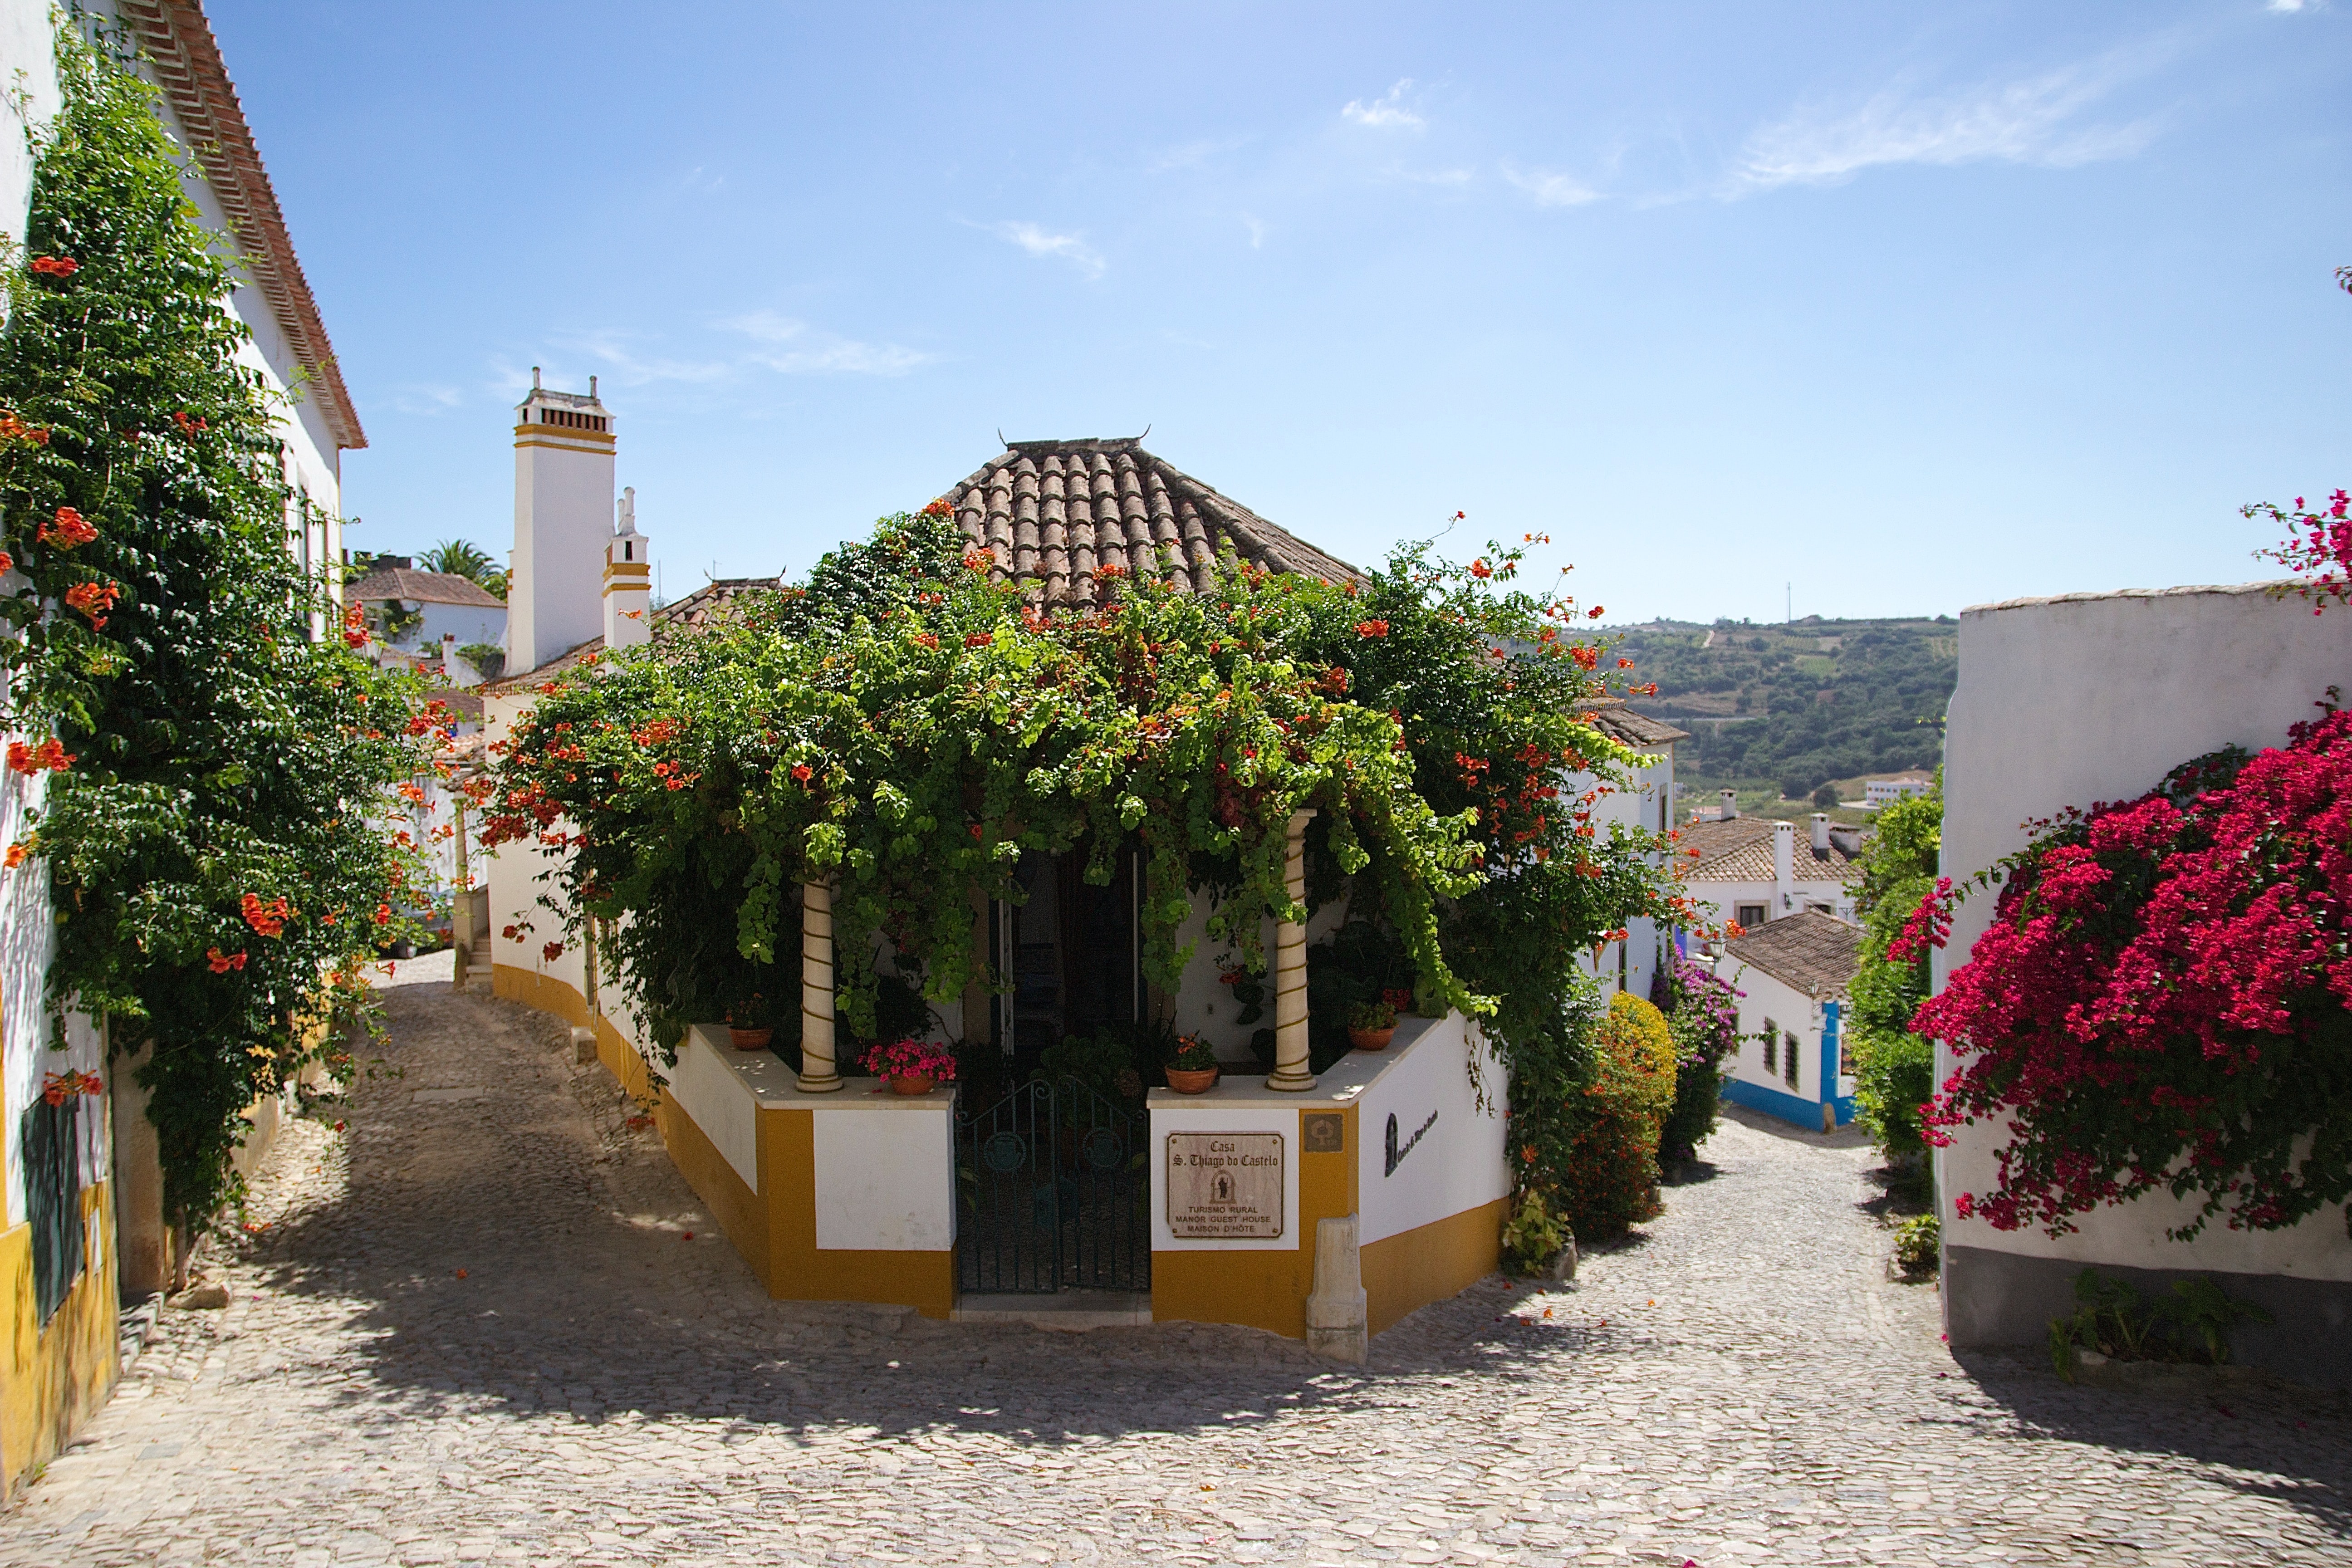 9 Best Things to do in Obidos, Portugal and Where to Stay